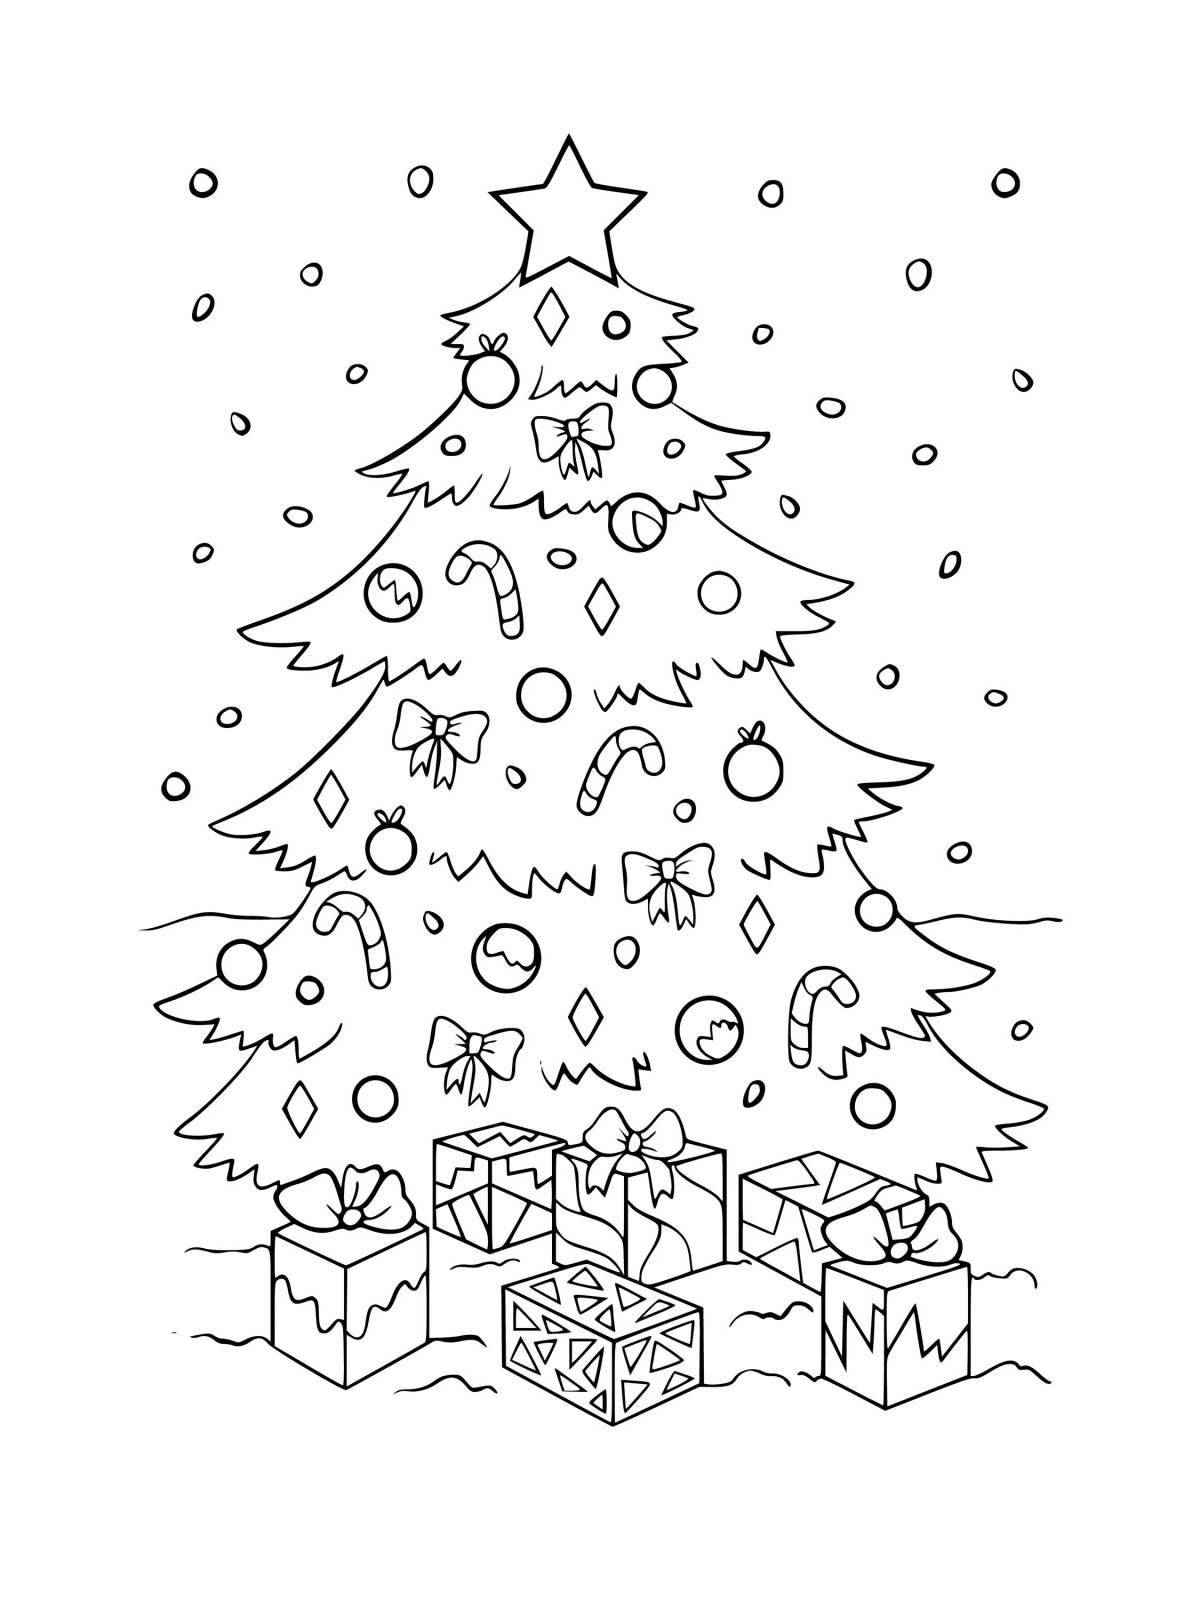 Splendid the forest grew a Christmas tree coloring pages